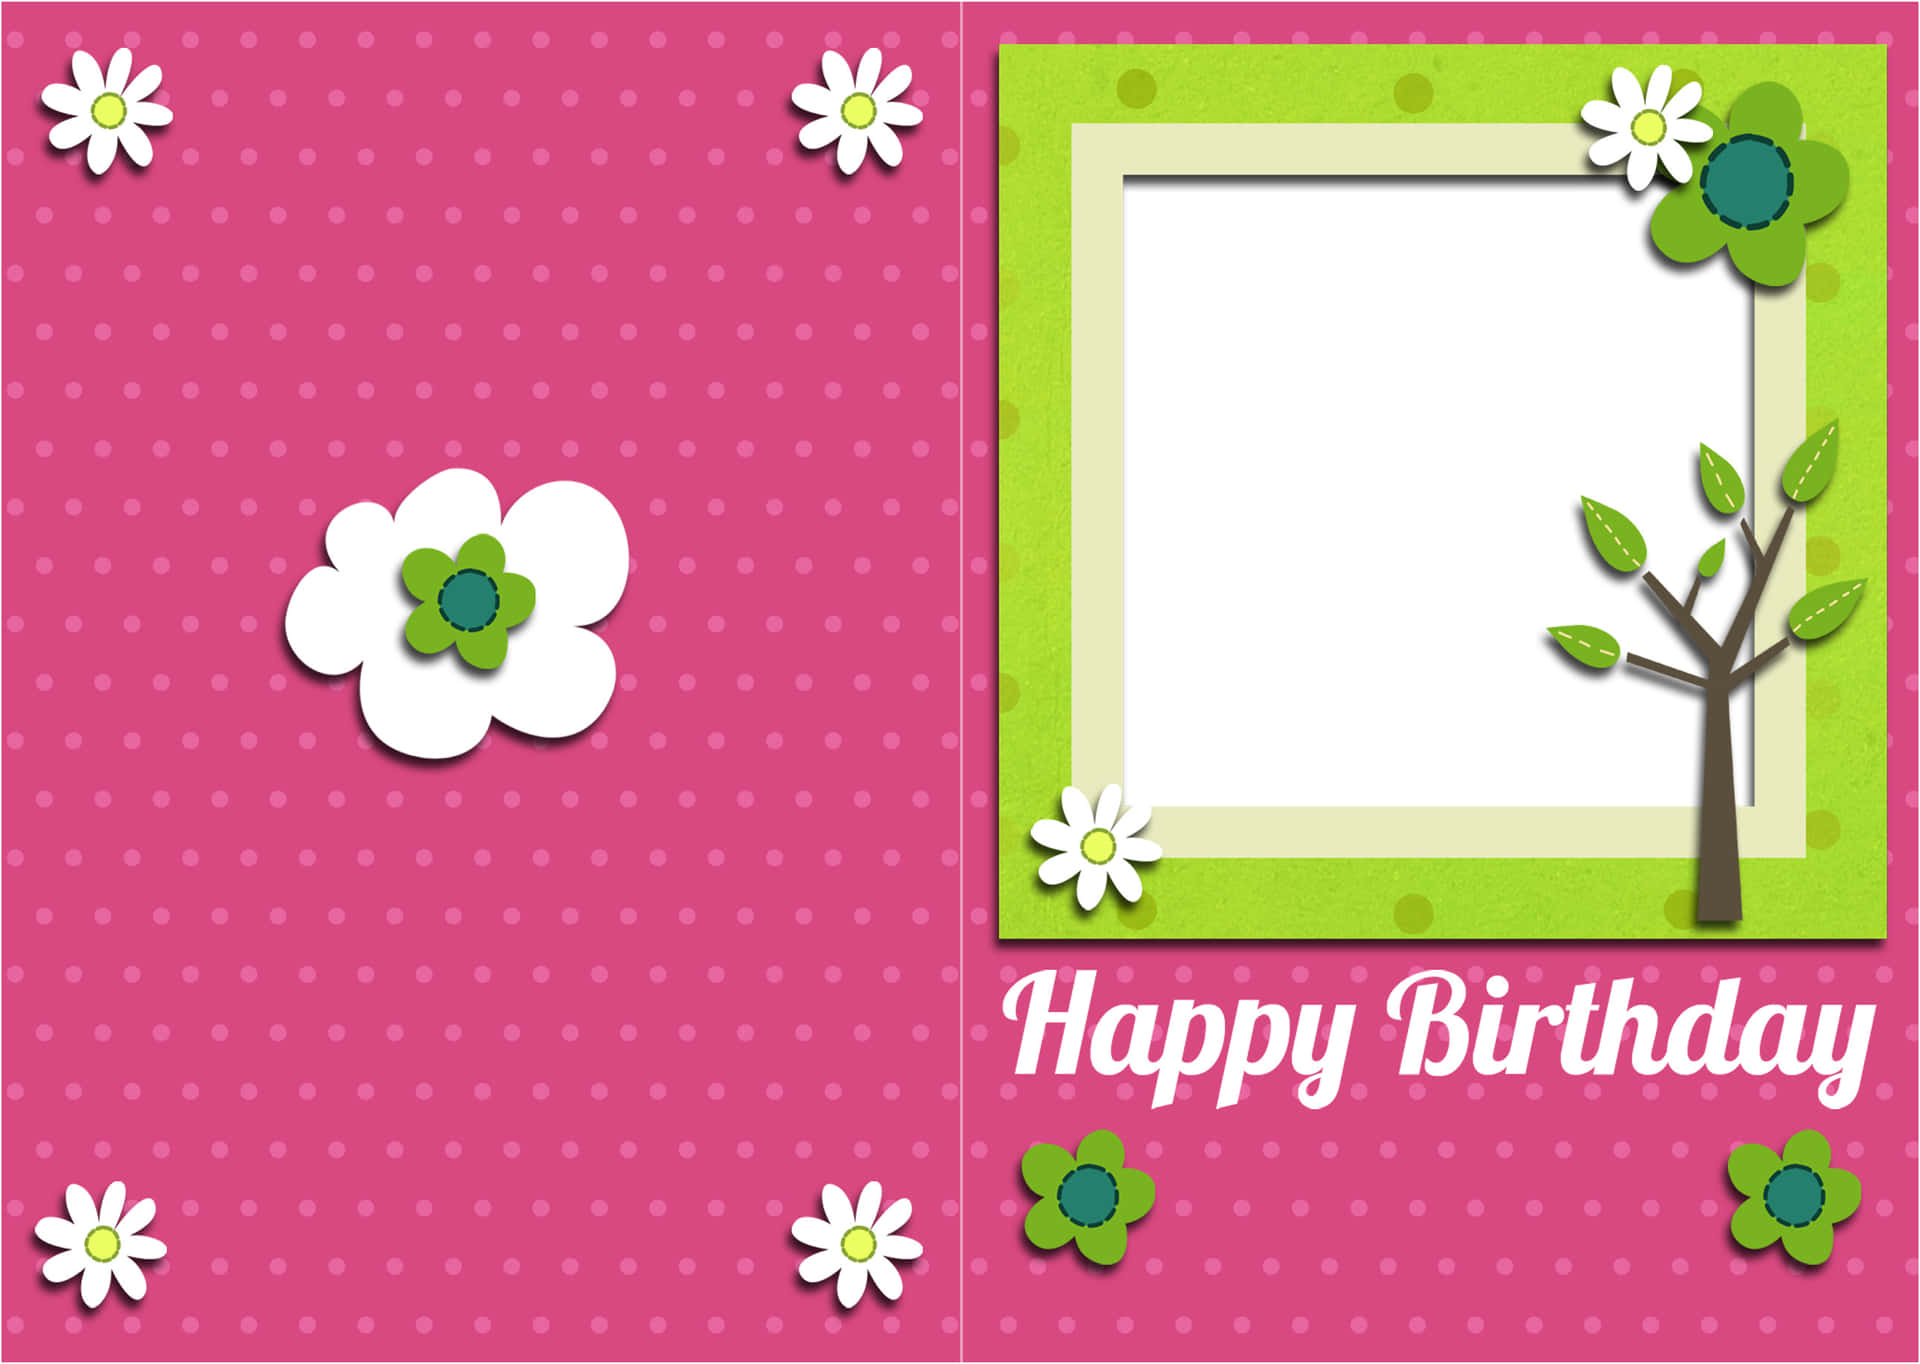 Happy Birthday Card With A Tree And Flowers